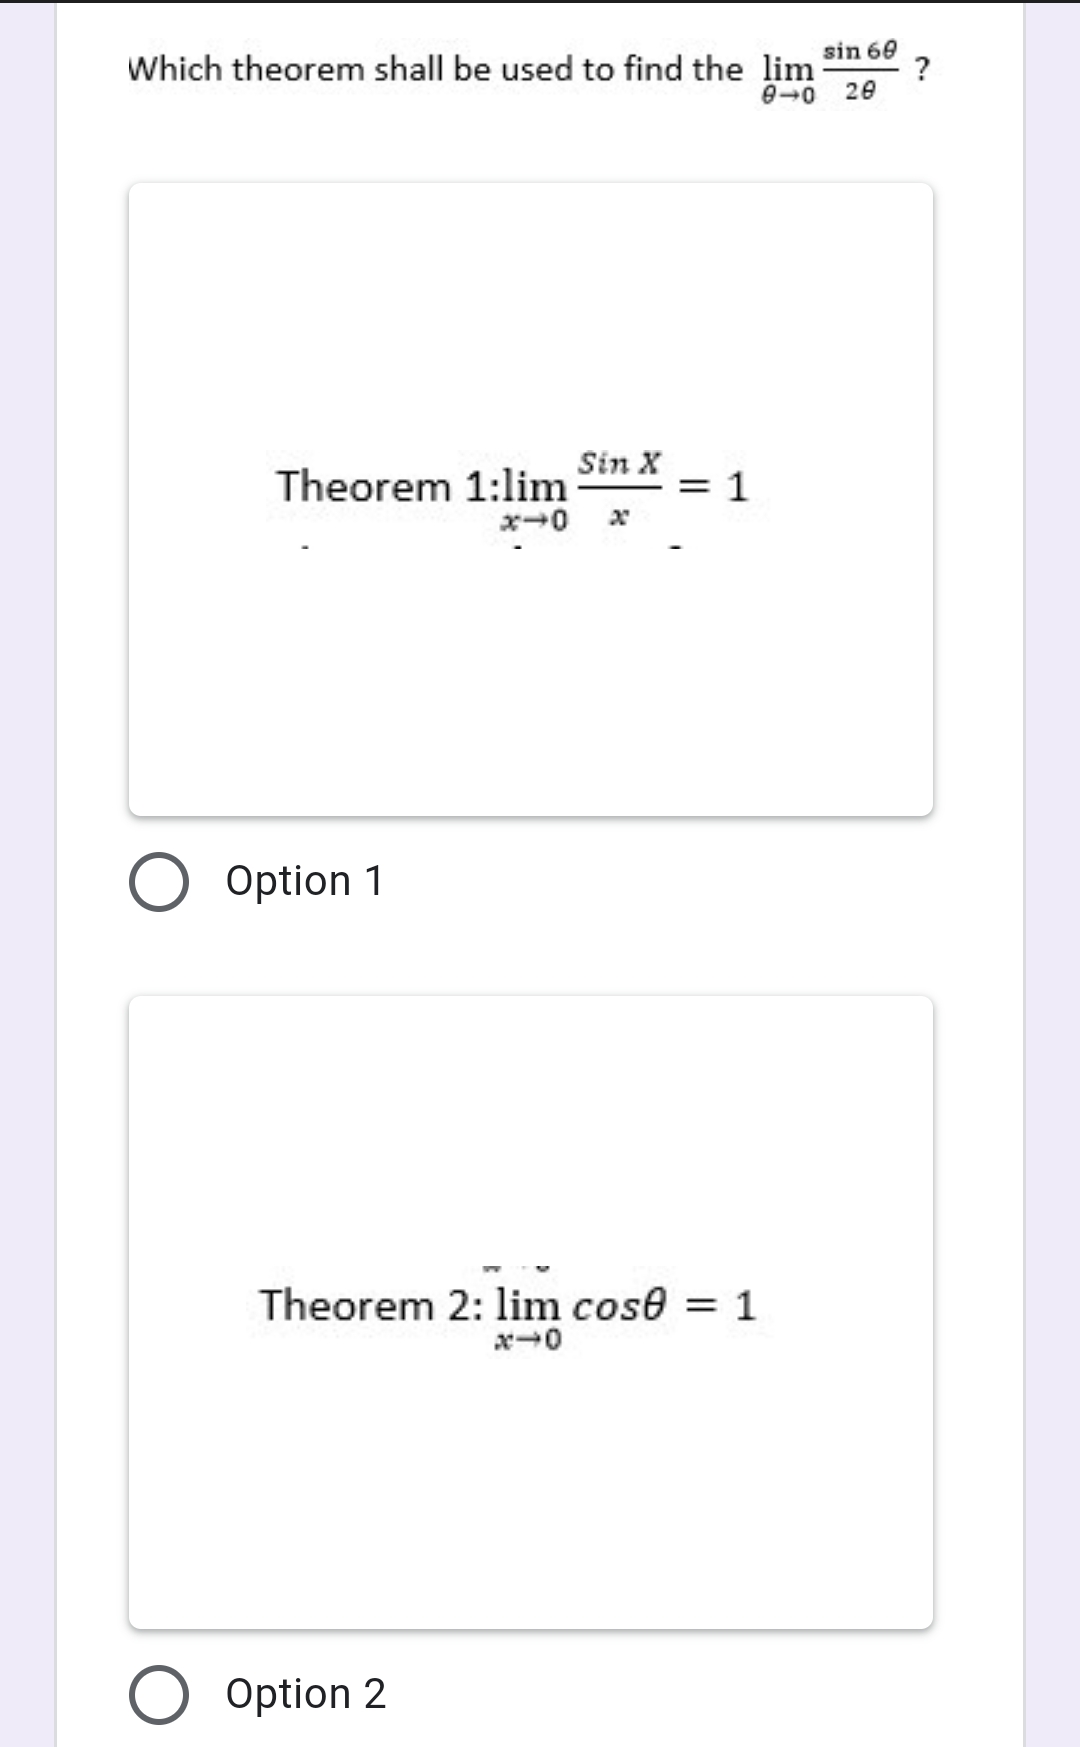 sin 60
Which theorem shall be used to find the lim
20
Theorem 1:lim
Sin X
= 1
x-0 x
Option 1
Theorem 2: lim cose
= 1
x-0
Option 2
